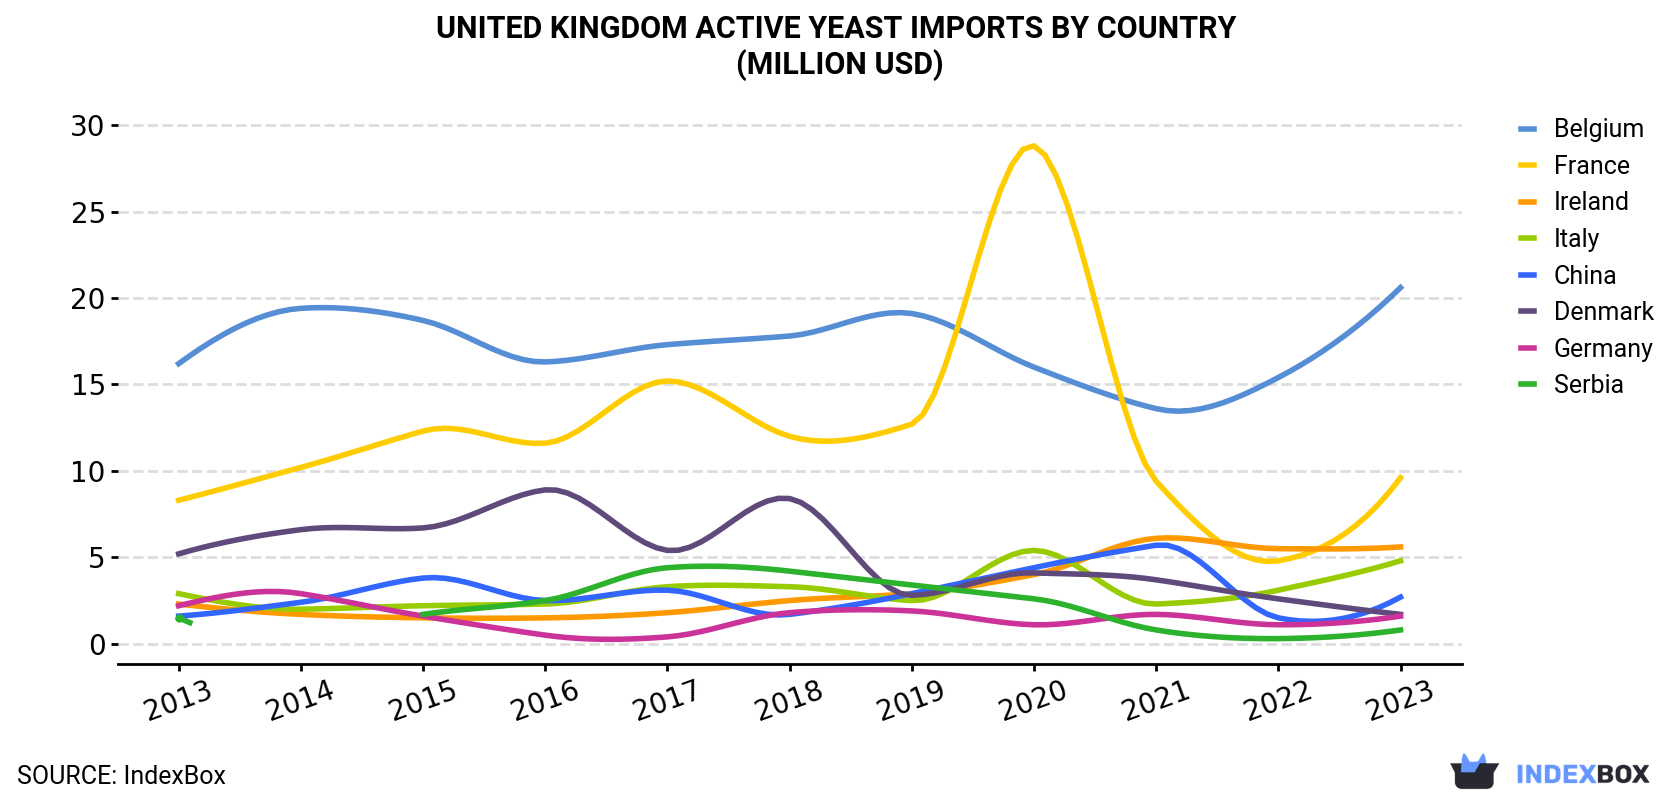 United Kingdom Active Yeast Imports By Country (Million USD)